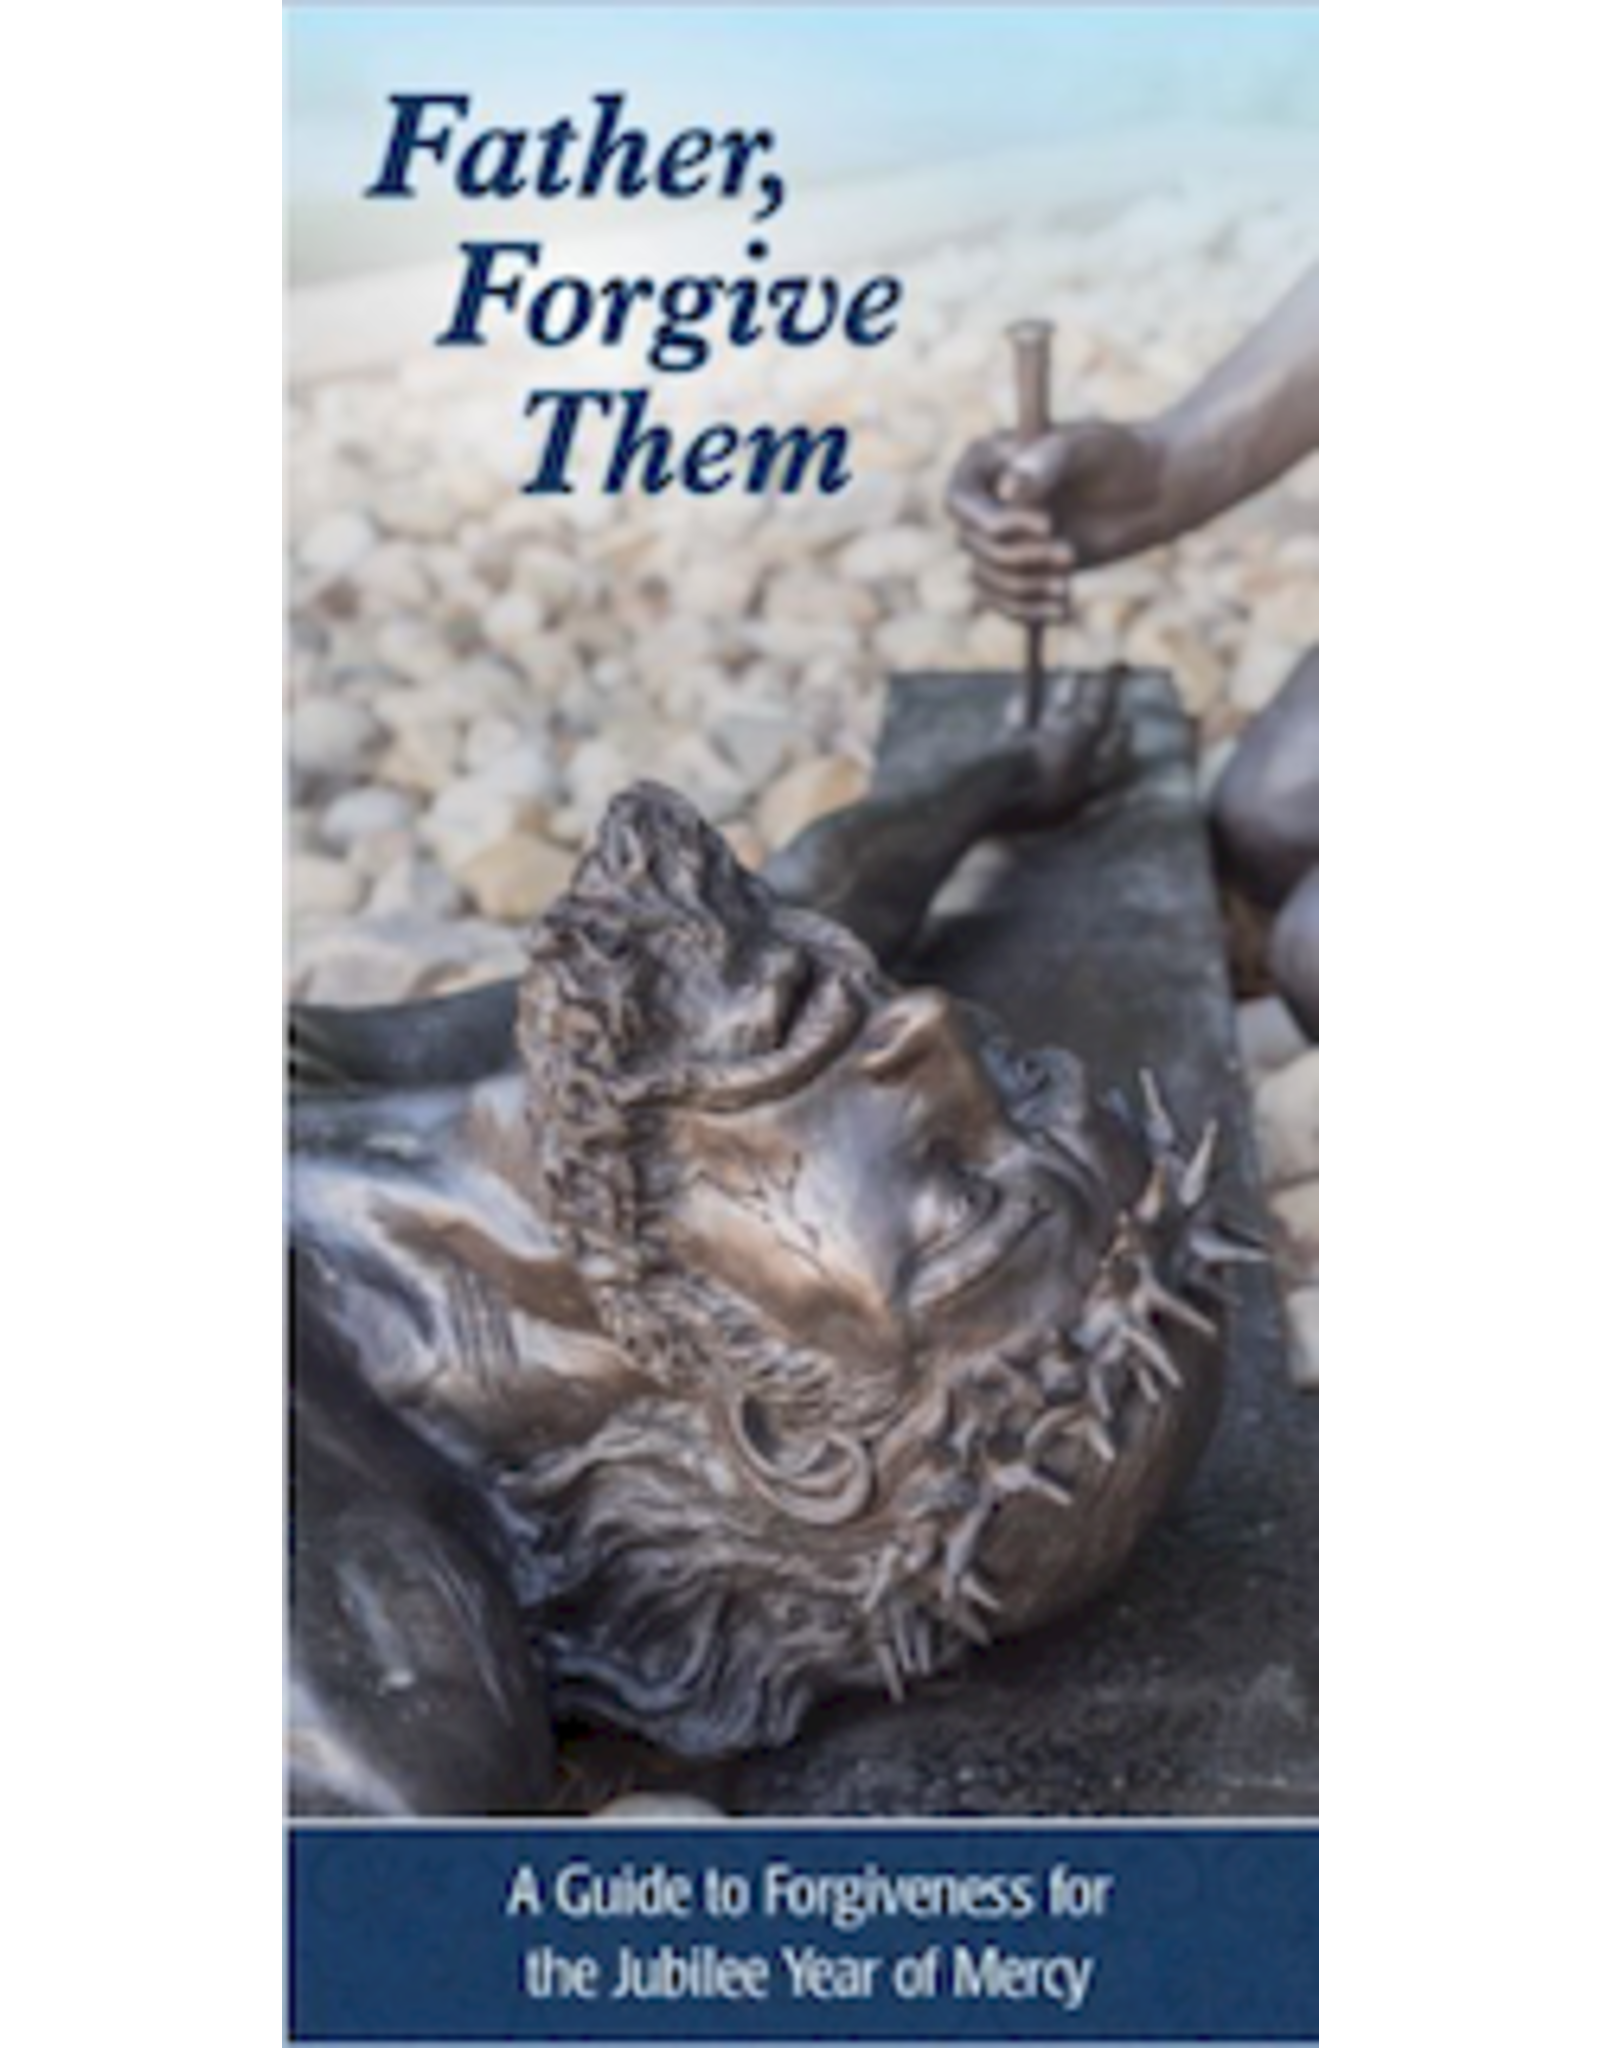 Association of Marian Helpers Father, Forgive Them: A Guide to Forgiveness for the Jubilee Year of Mercy